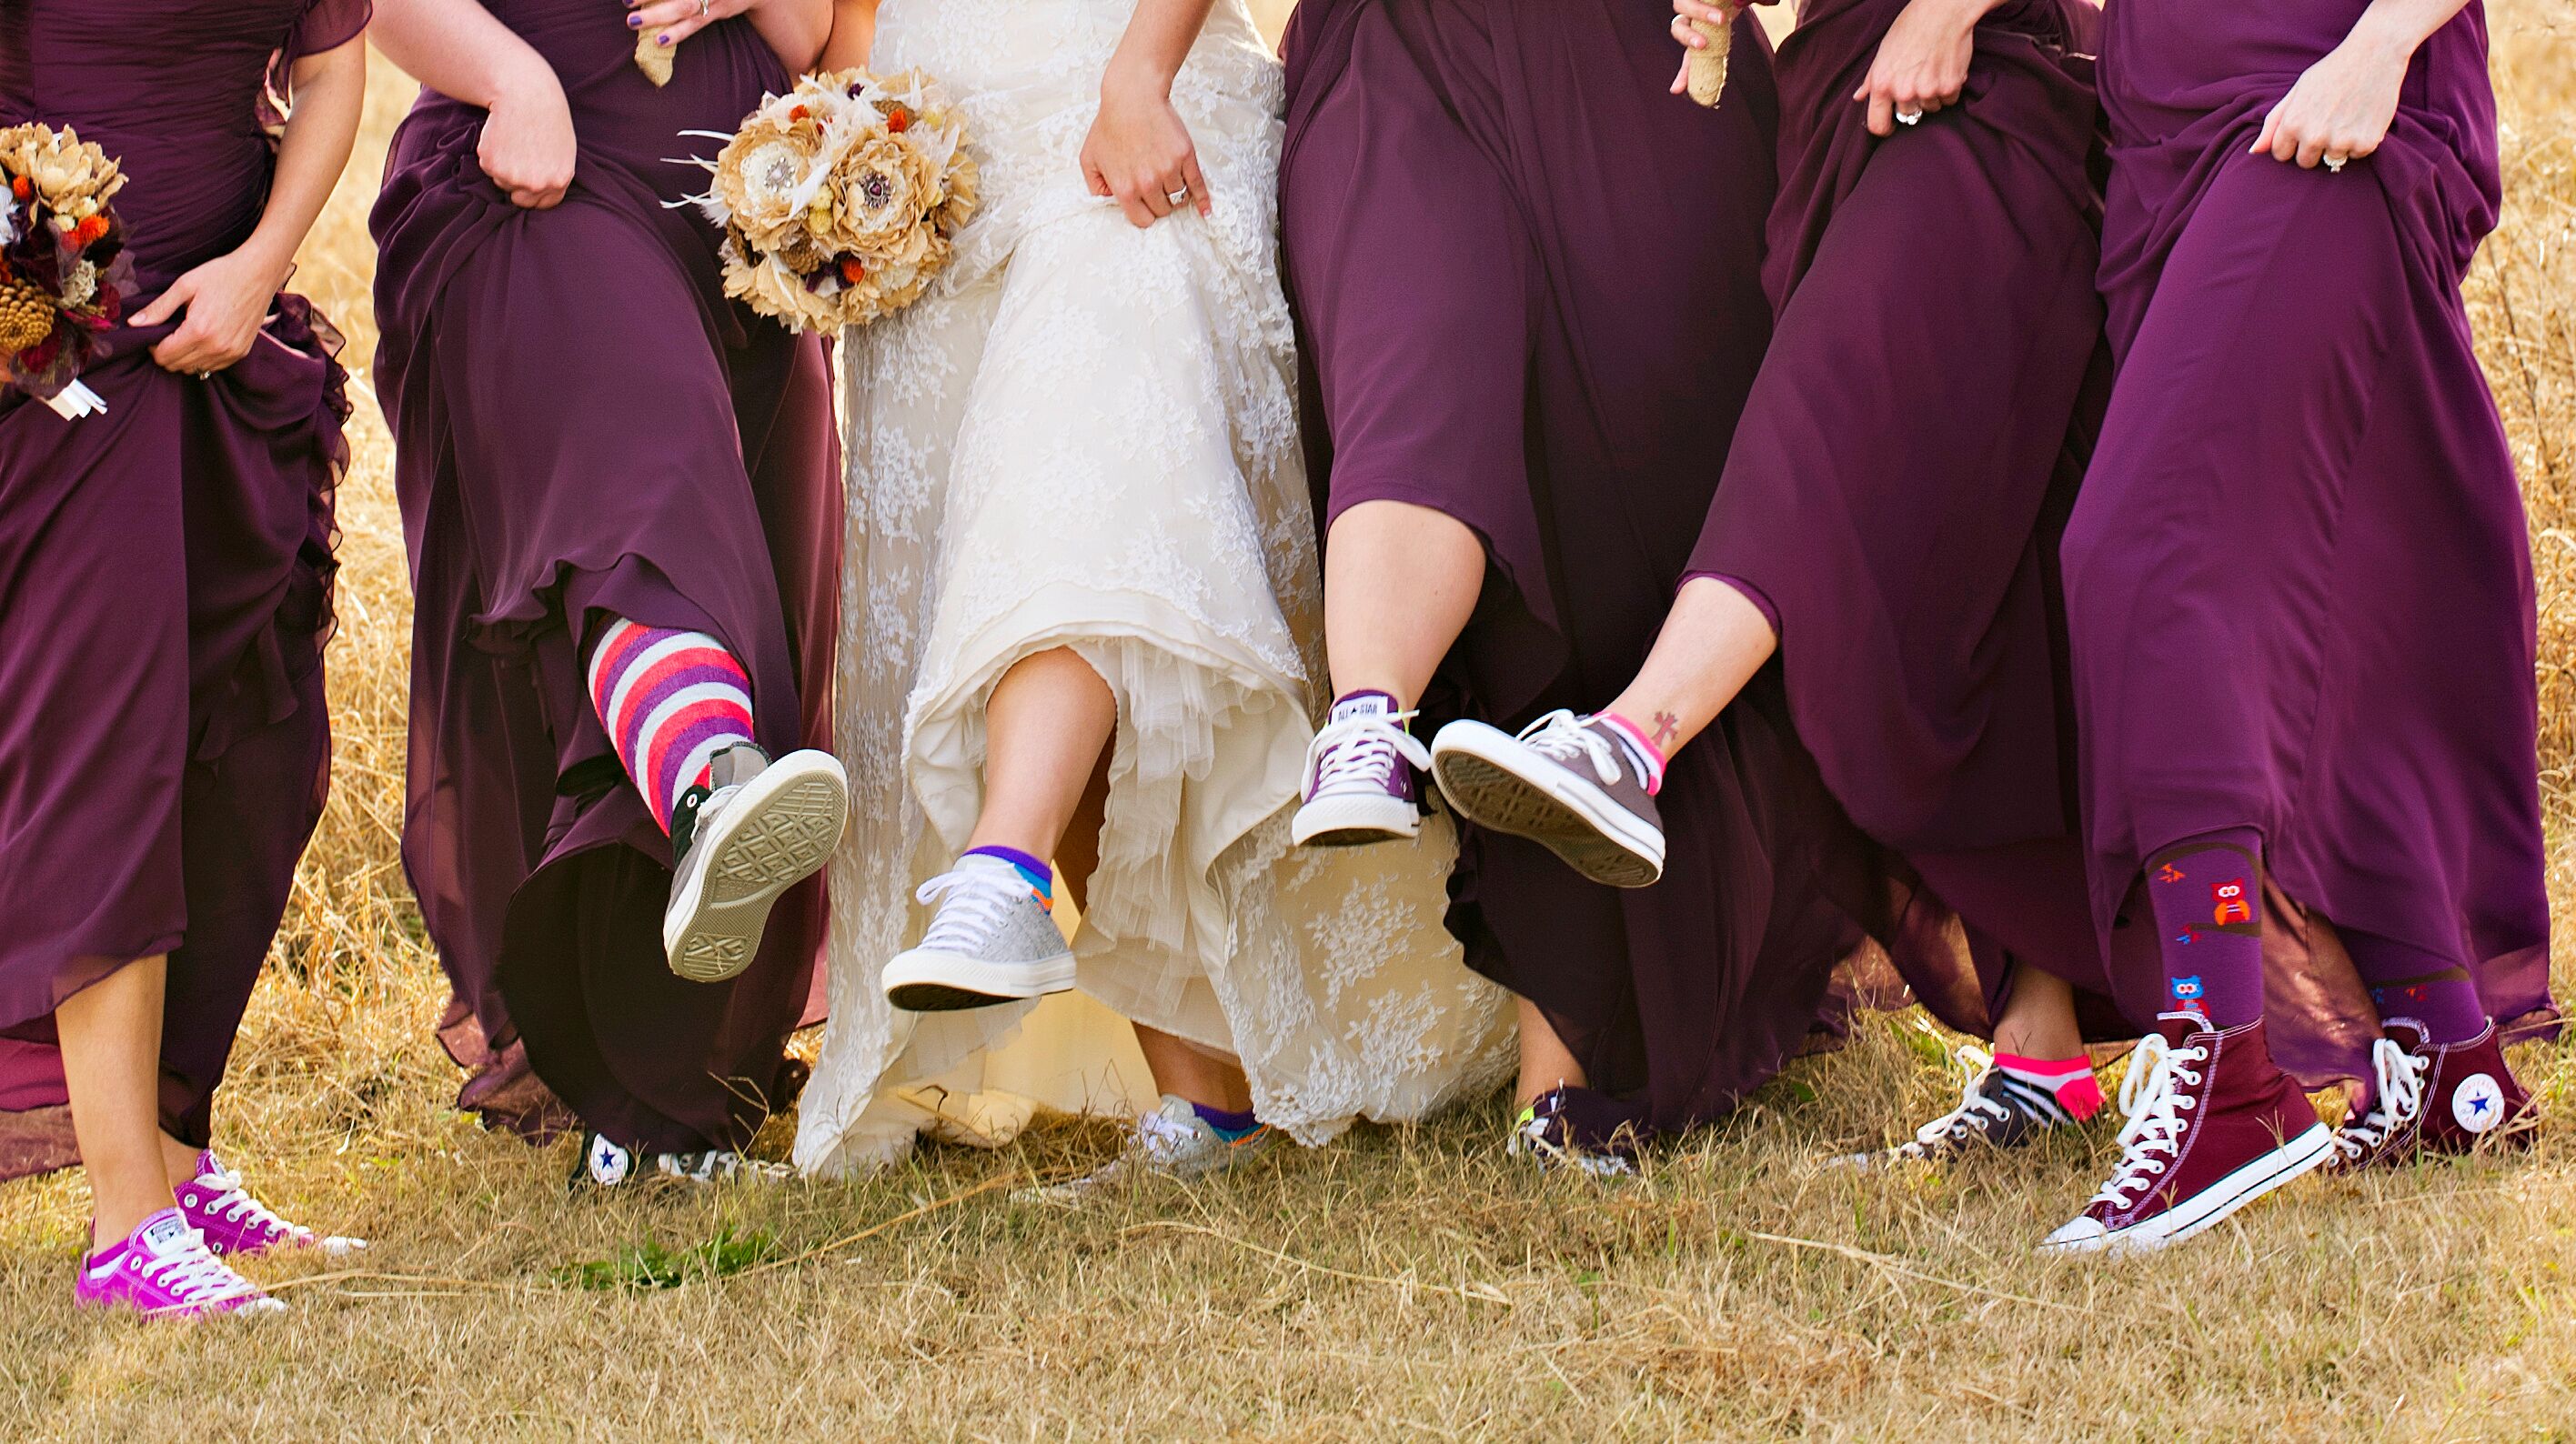 wedding dresses with converse sneakers